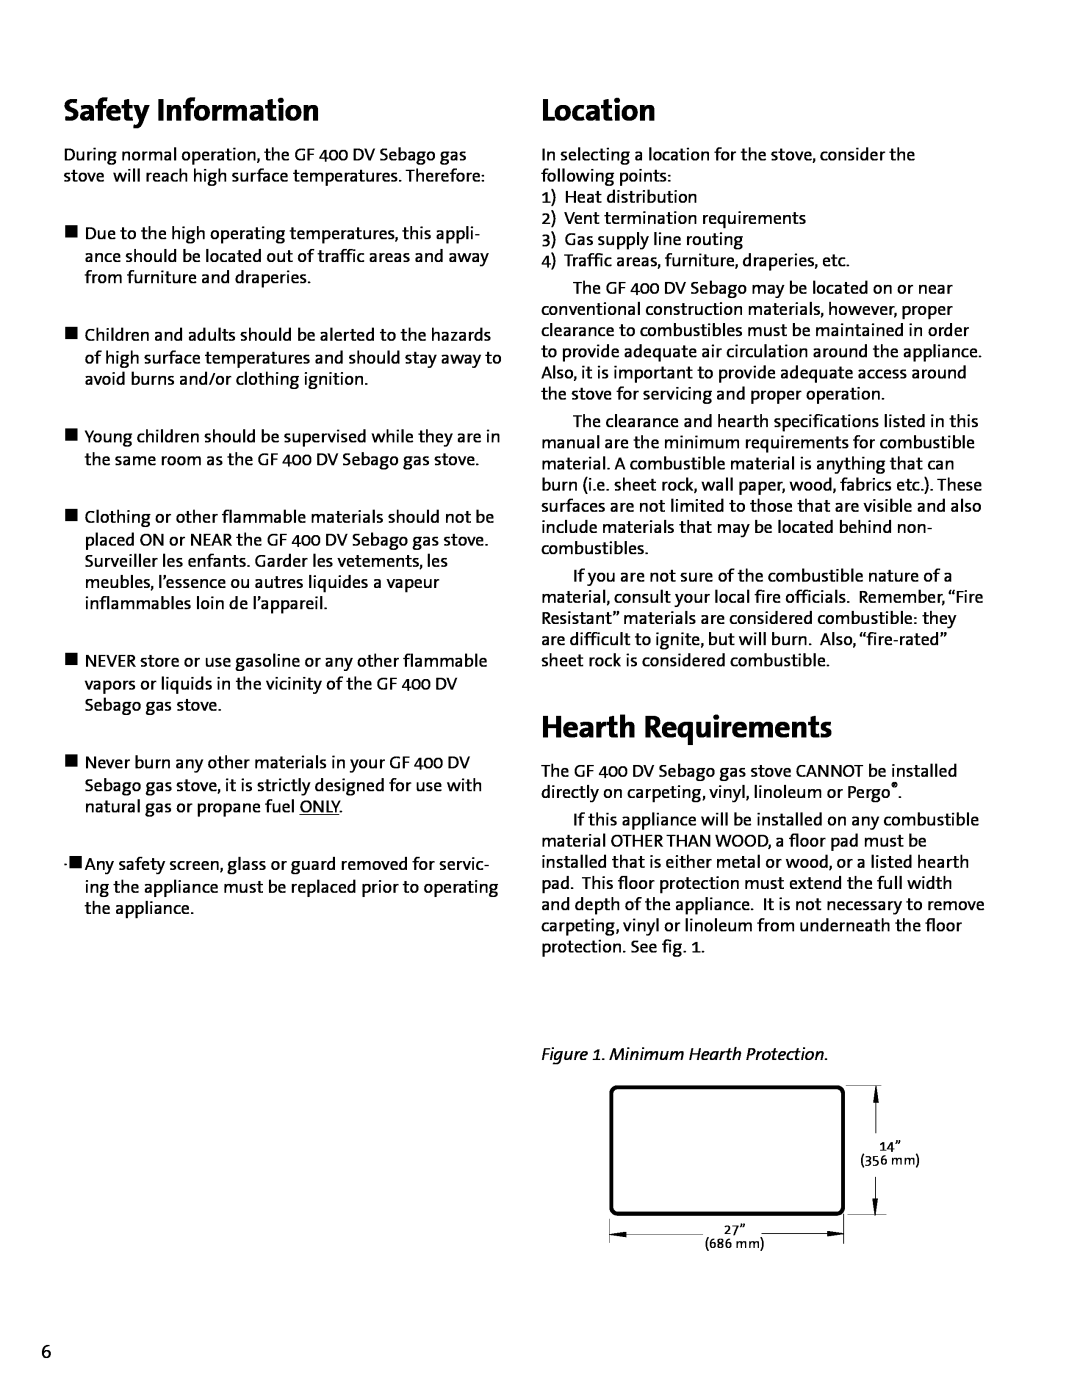 Jotul GF 400 DV manual Safety Information, Location, Hearth Requirements, Minimum Hearth Protection 